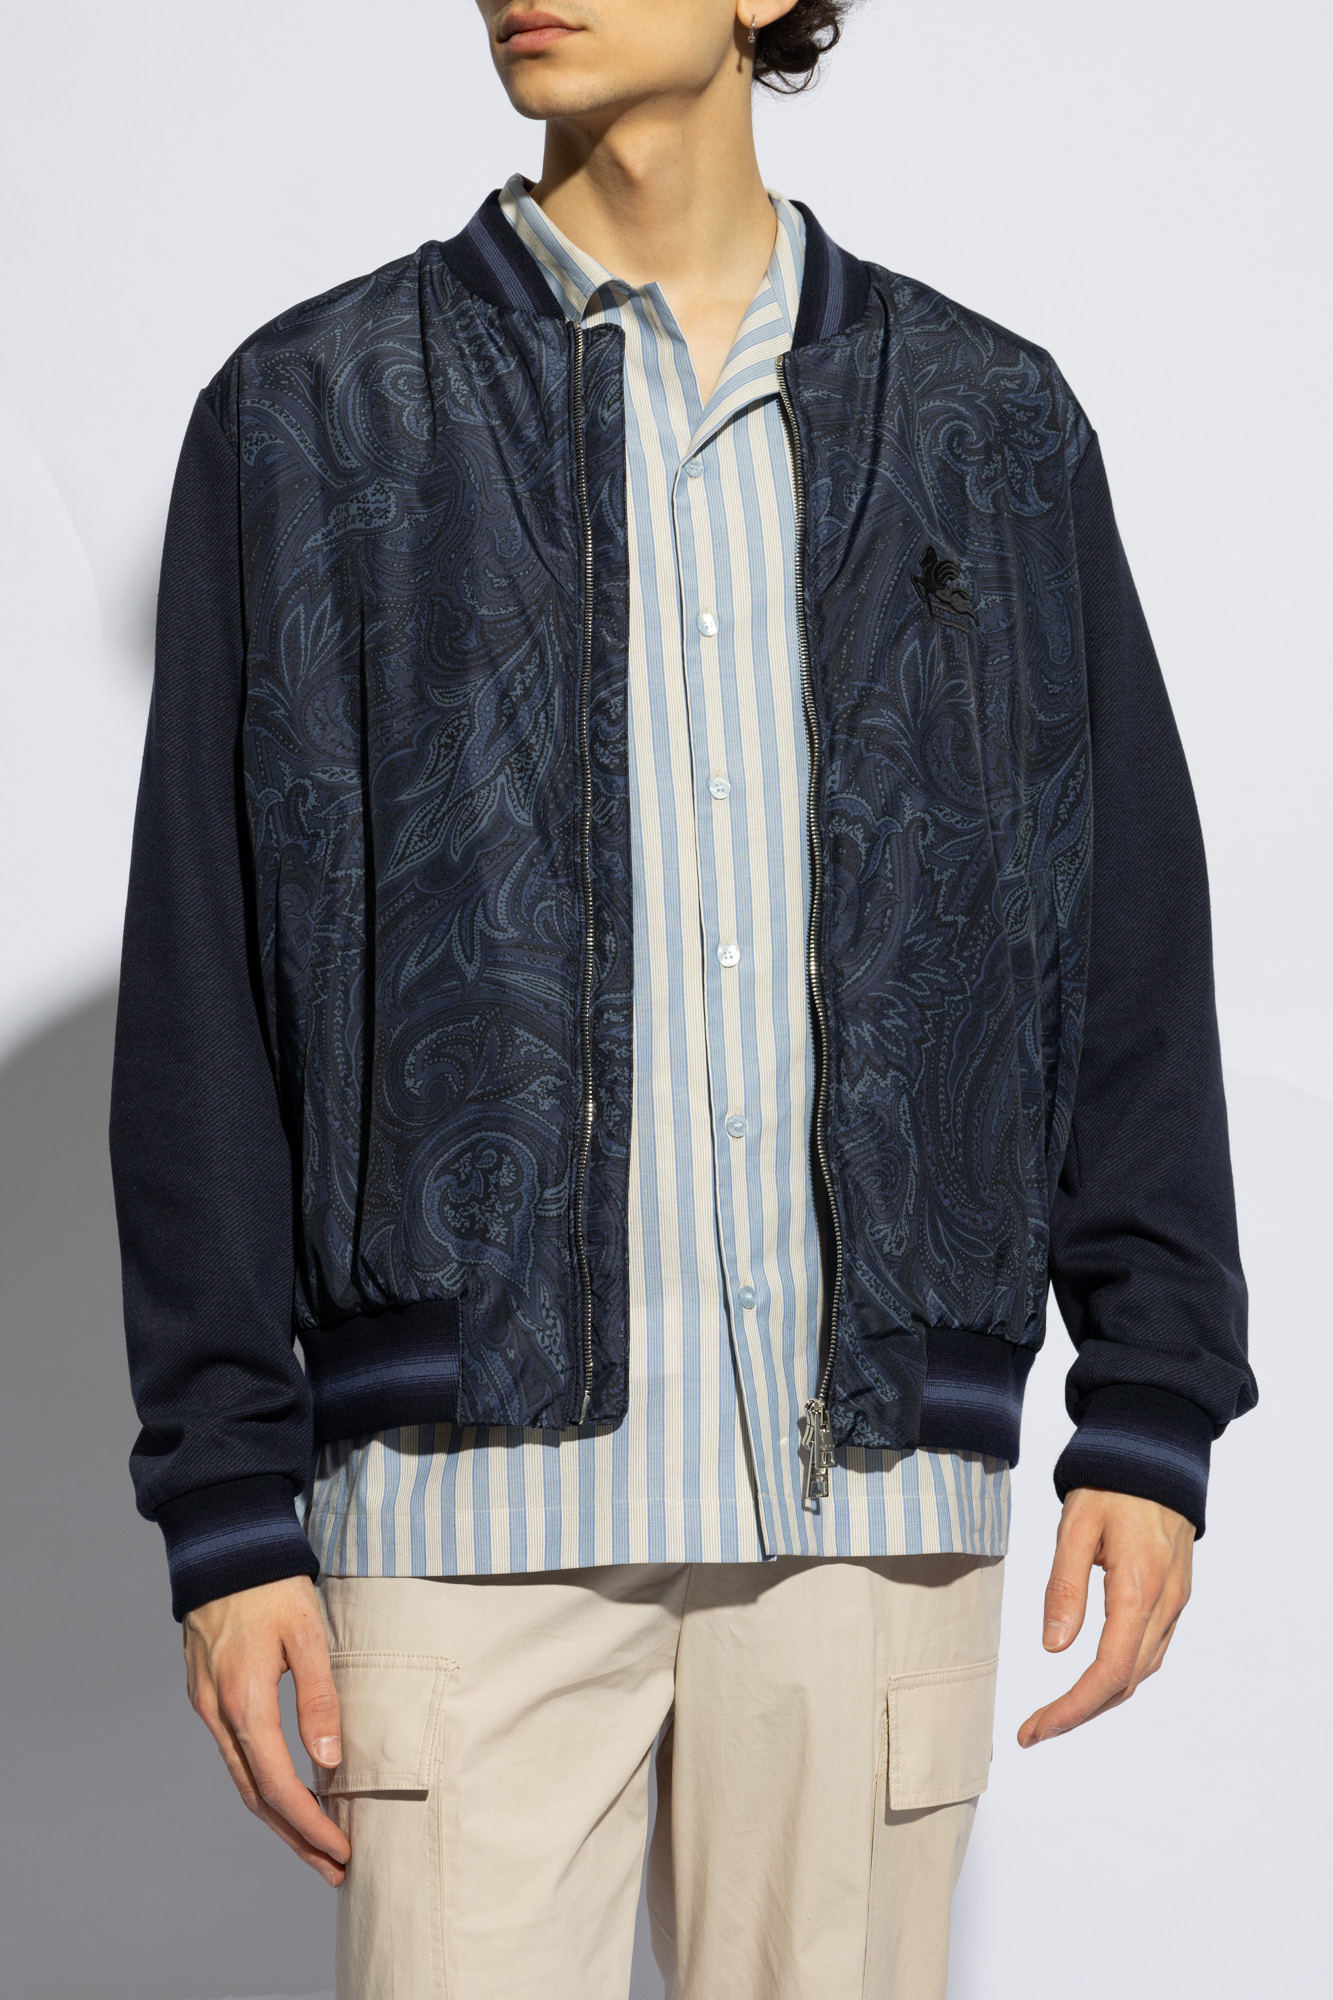 Etro ‘Bomber’ jacket for with ‘paisley’ pattern